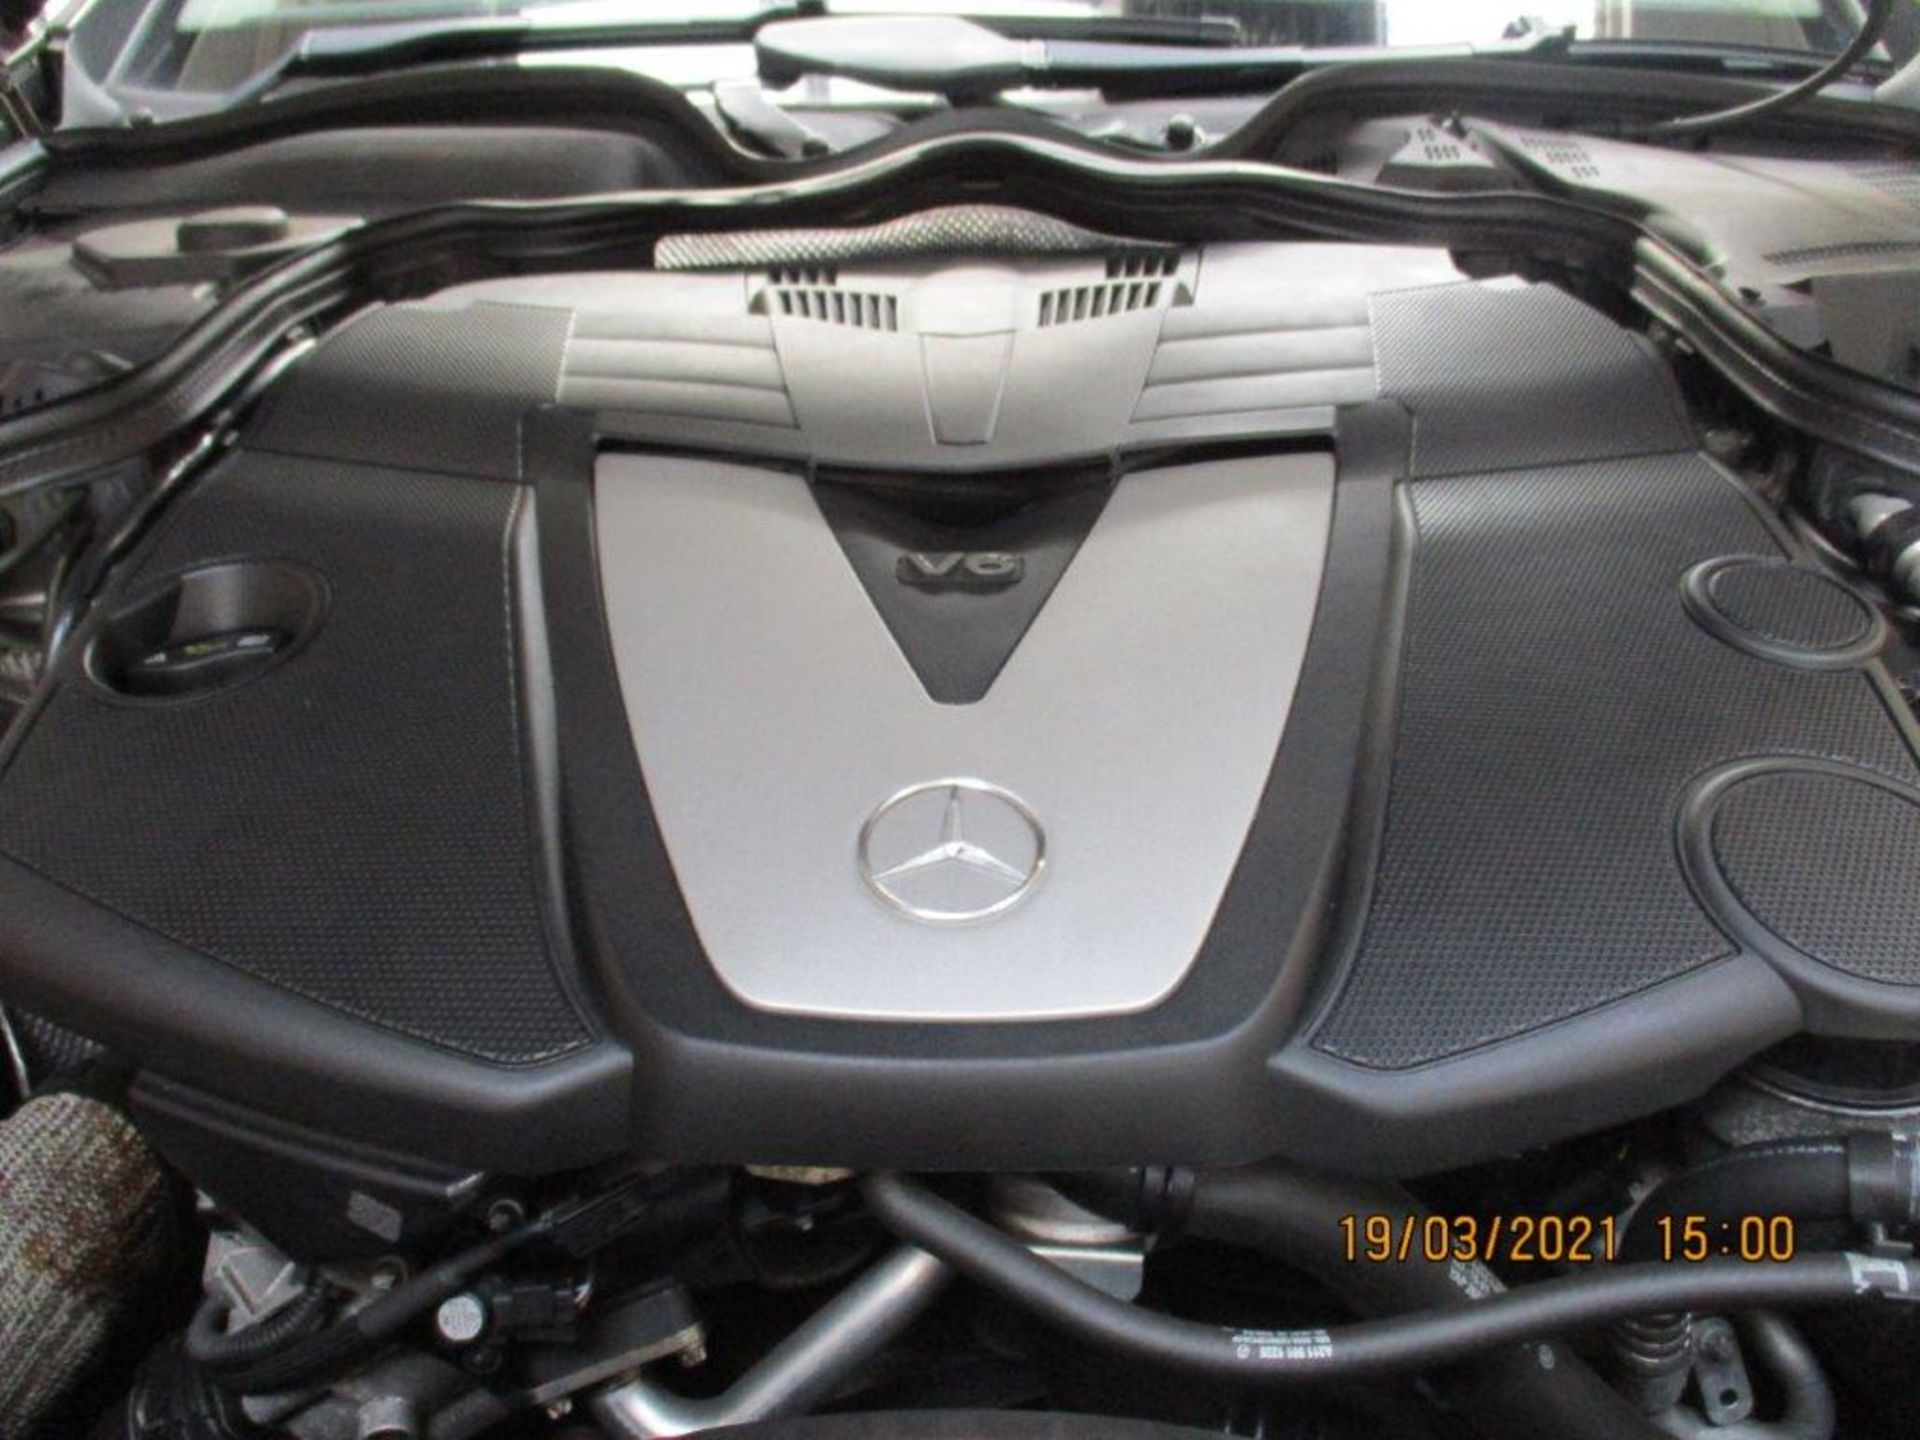 57 07 Mercedes CLS 320 CDI Auto - Image 7 of 24